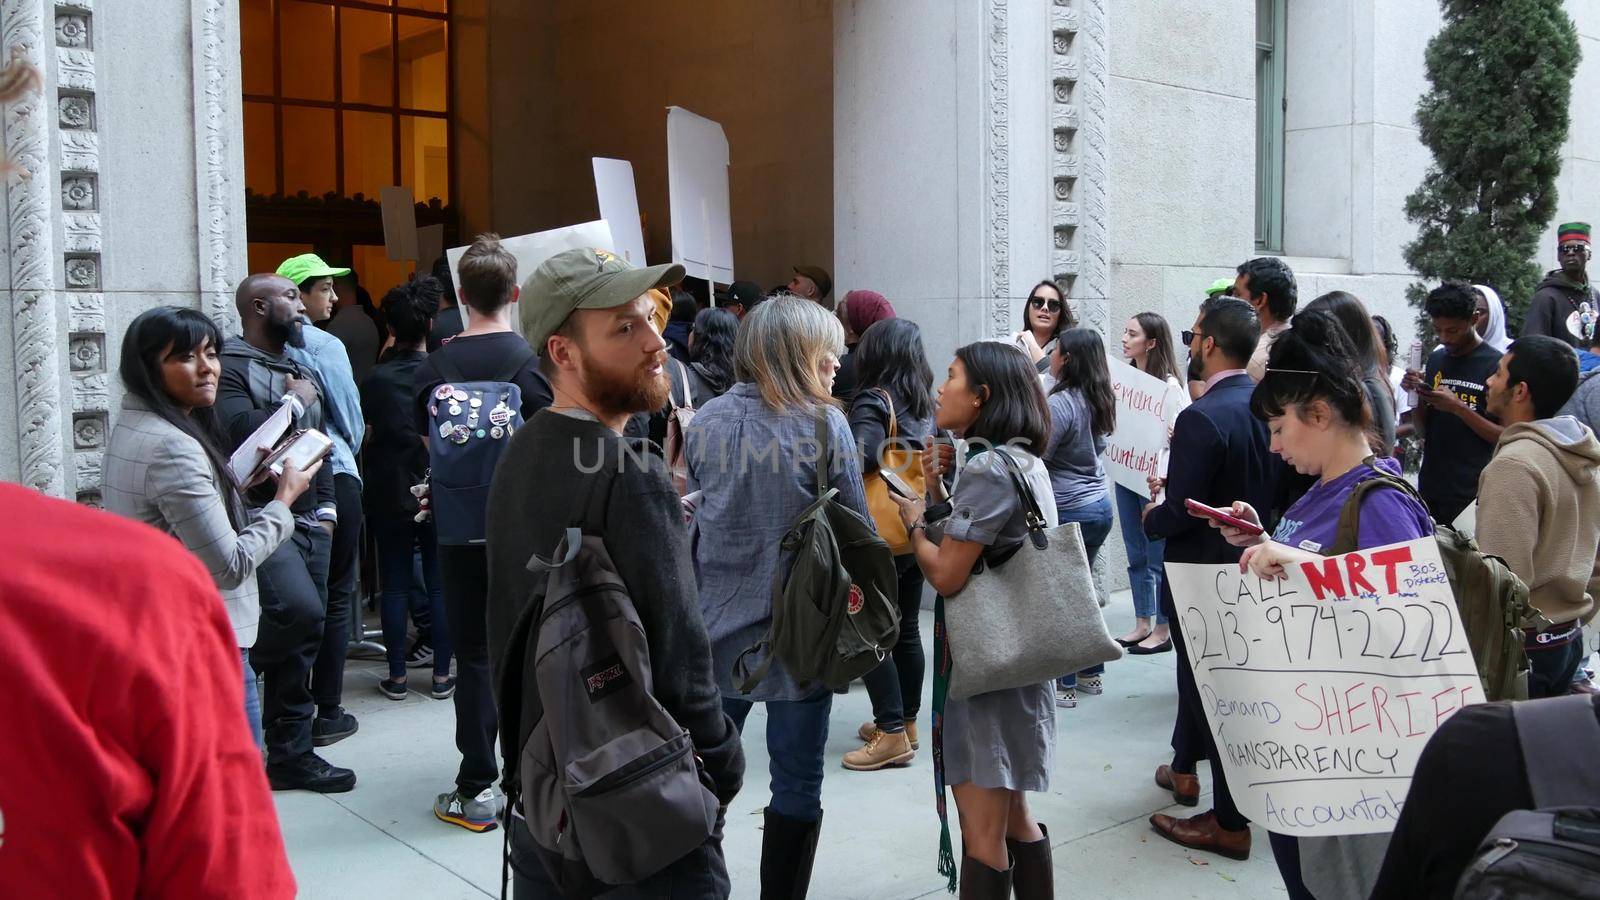 LOS ANGELES, CALIFORNIA, USA - 30 OCT 2019: People strike near Hall of Justice. Protest picket in front of Sheriff's Department and Courthouse. Demonstration of activists near LA government building.